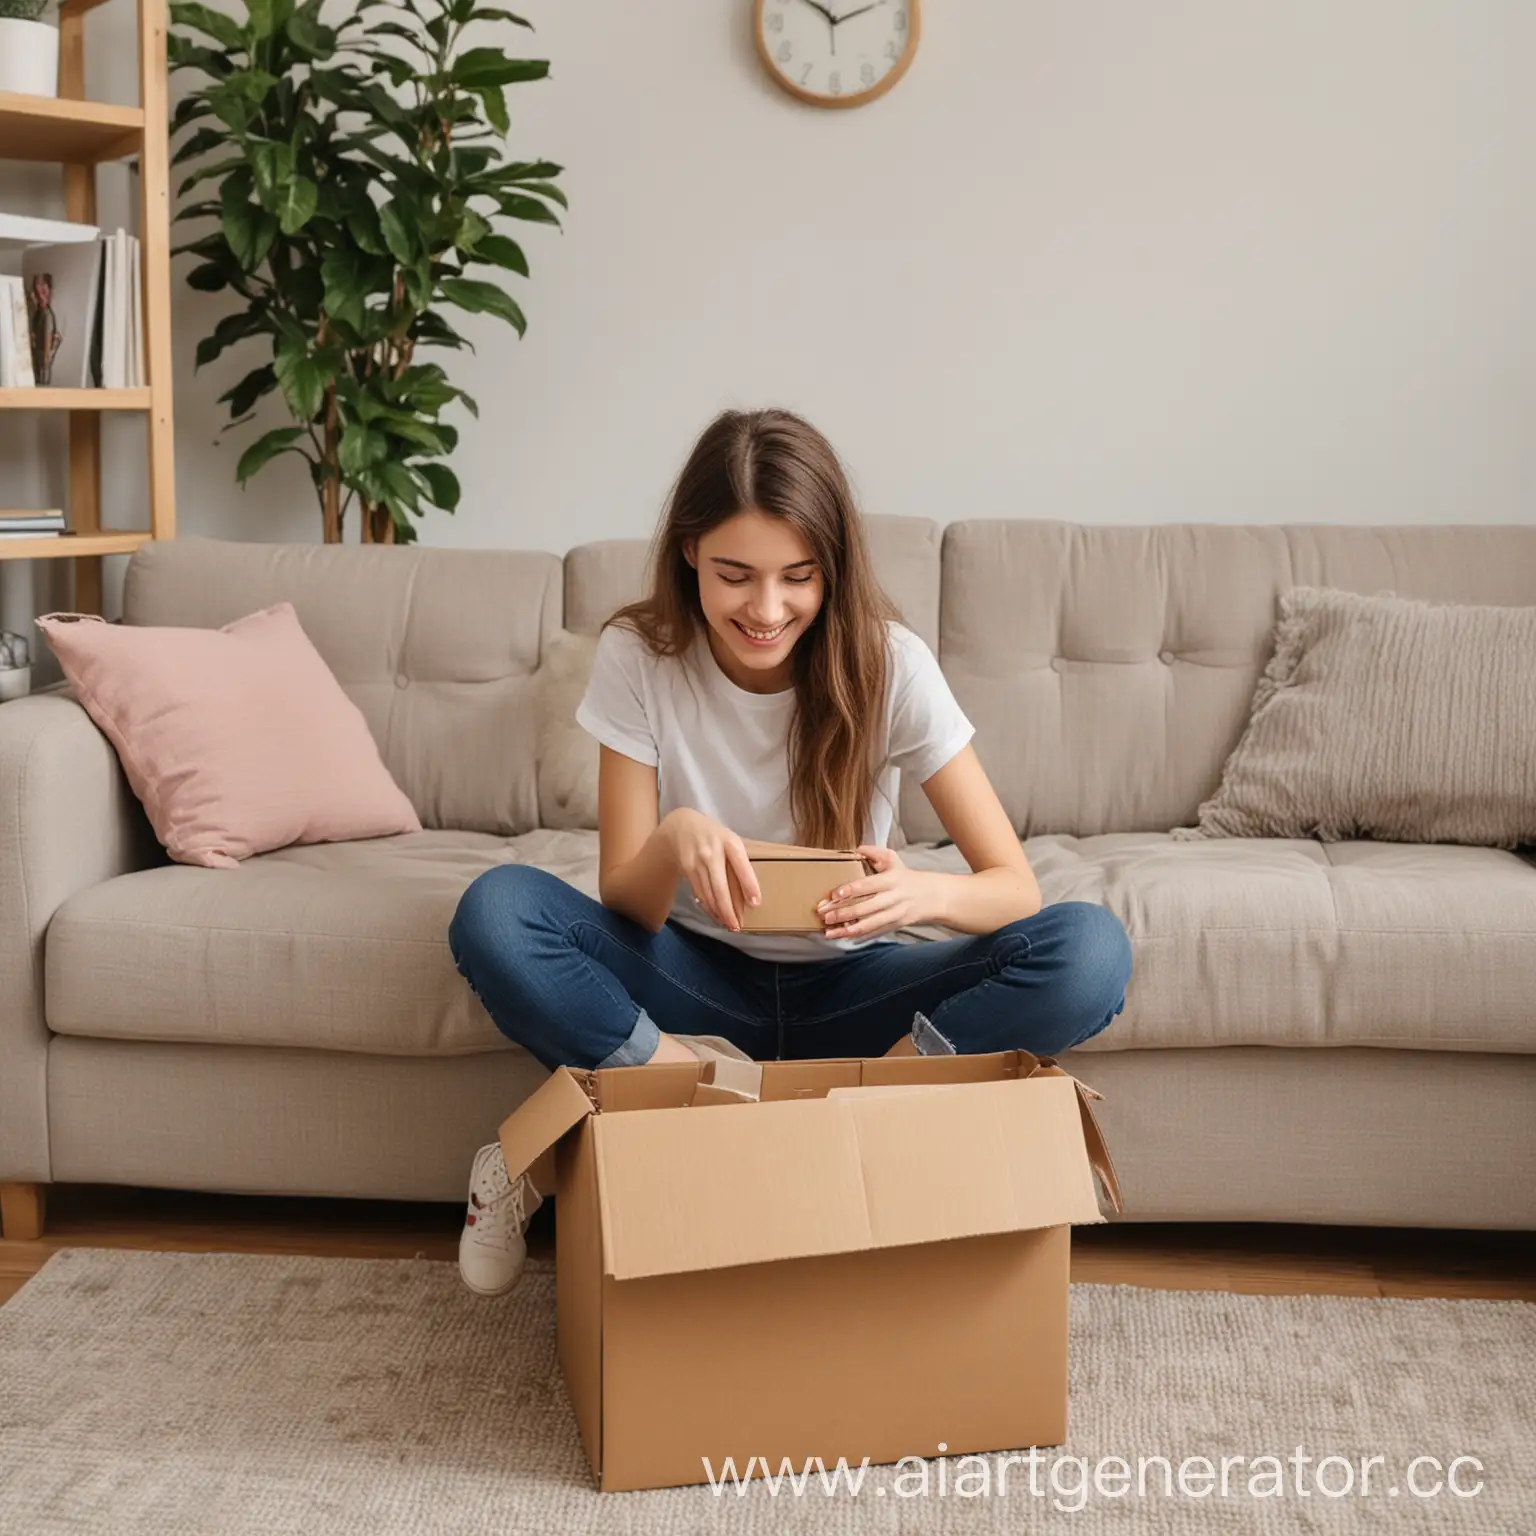 Smiling-Girl-Opening-Delivery-Box-on-Couch-at-Home